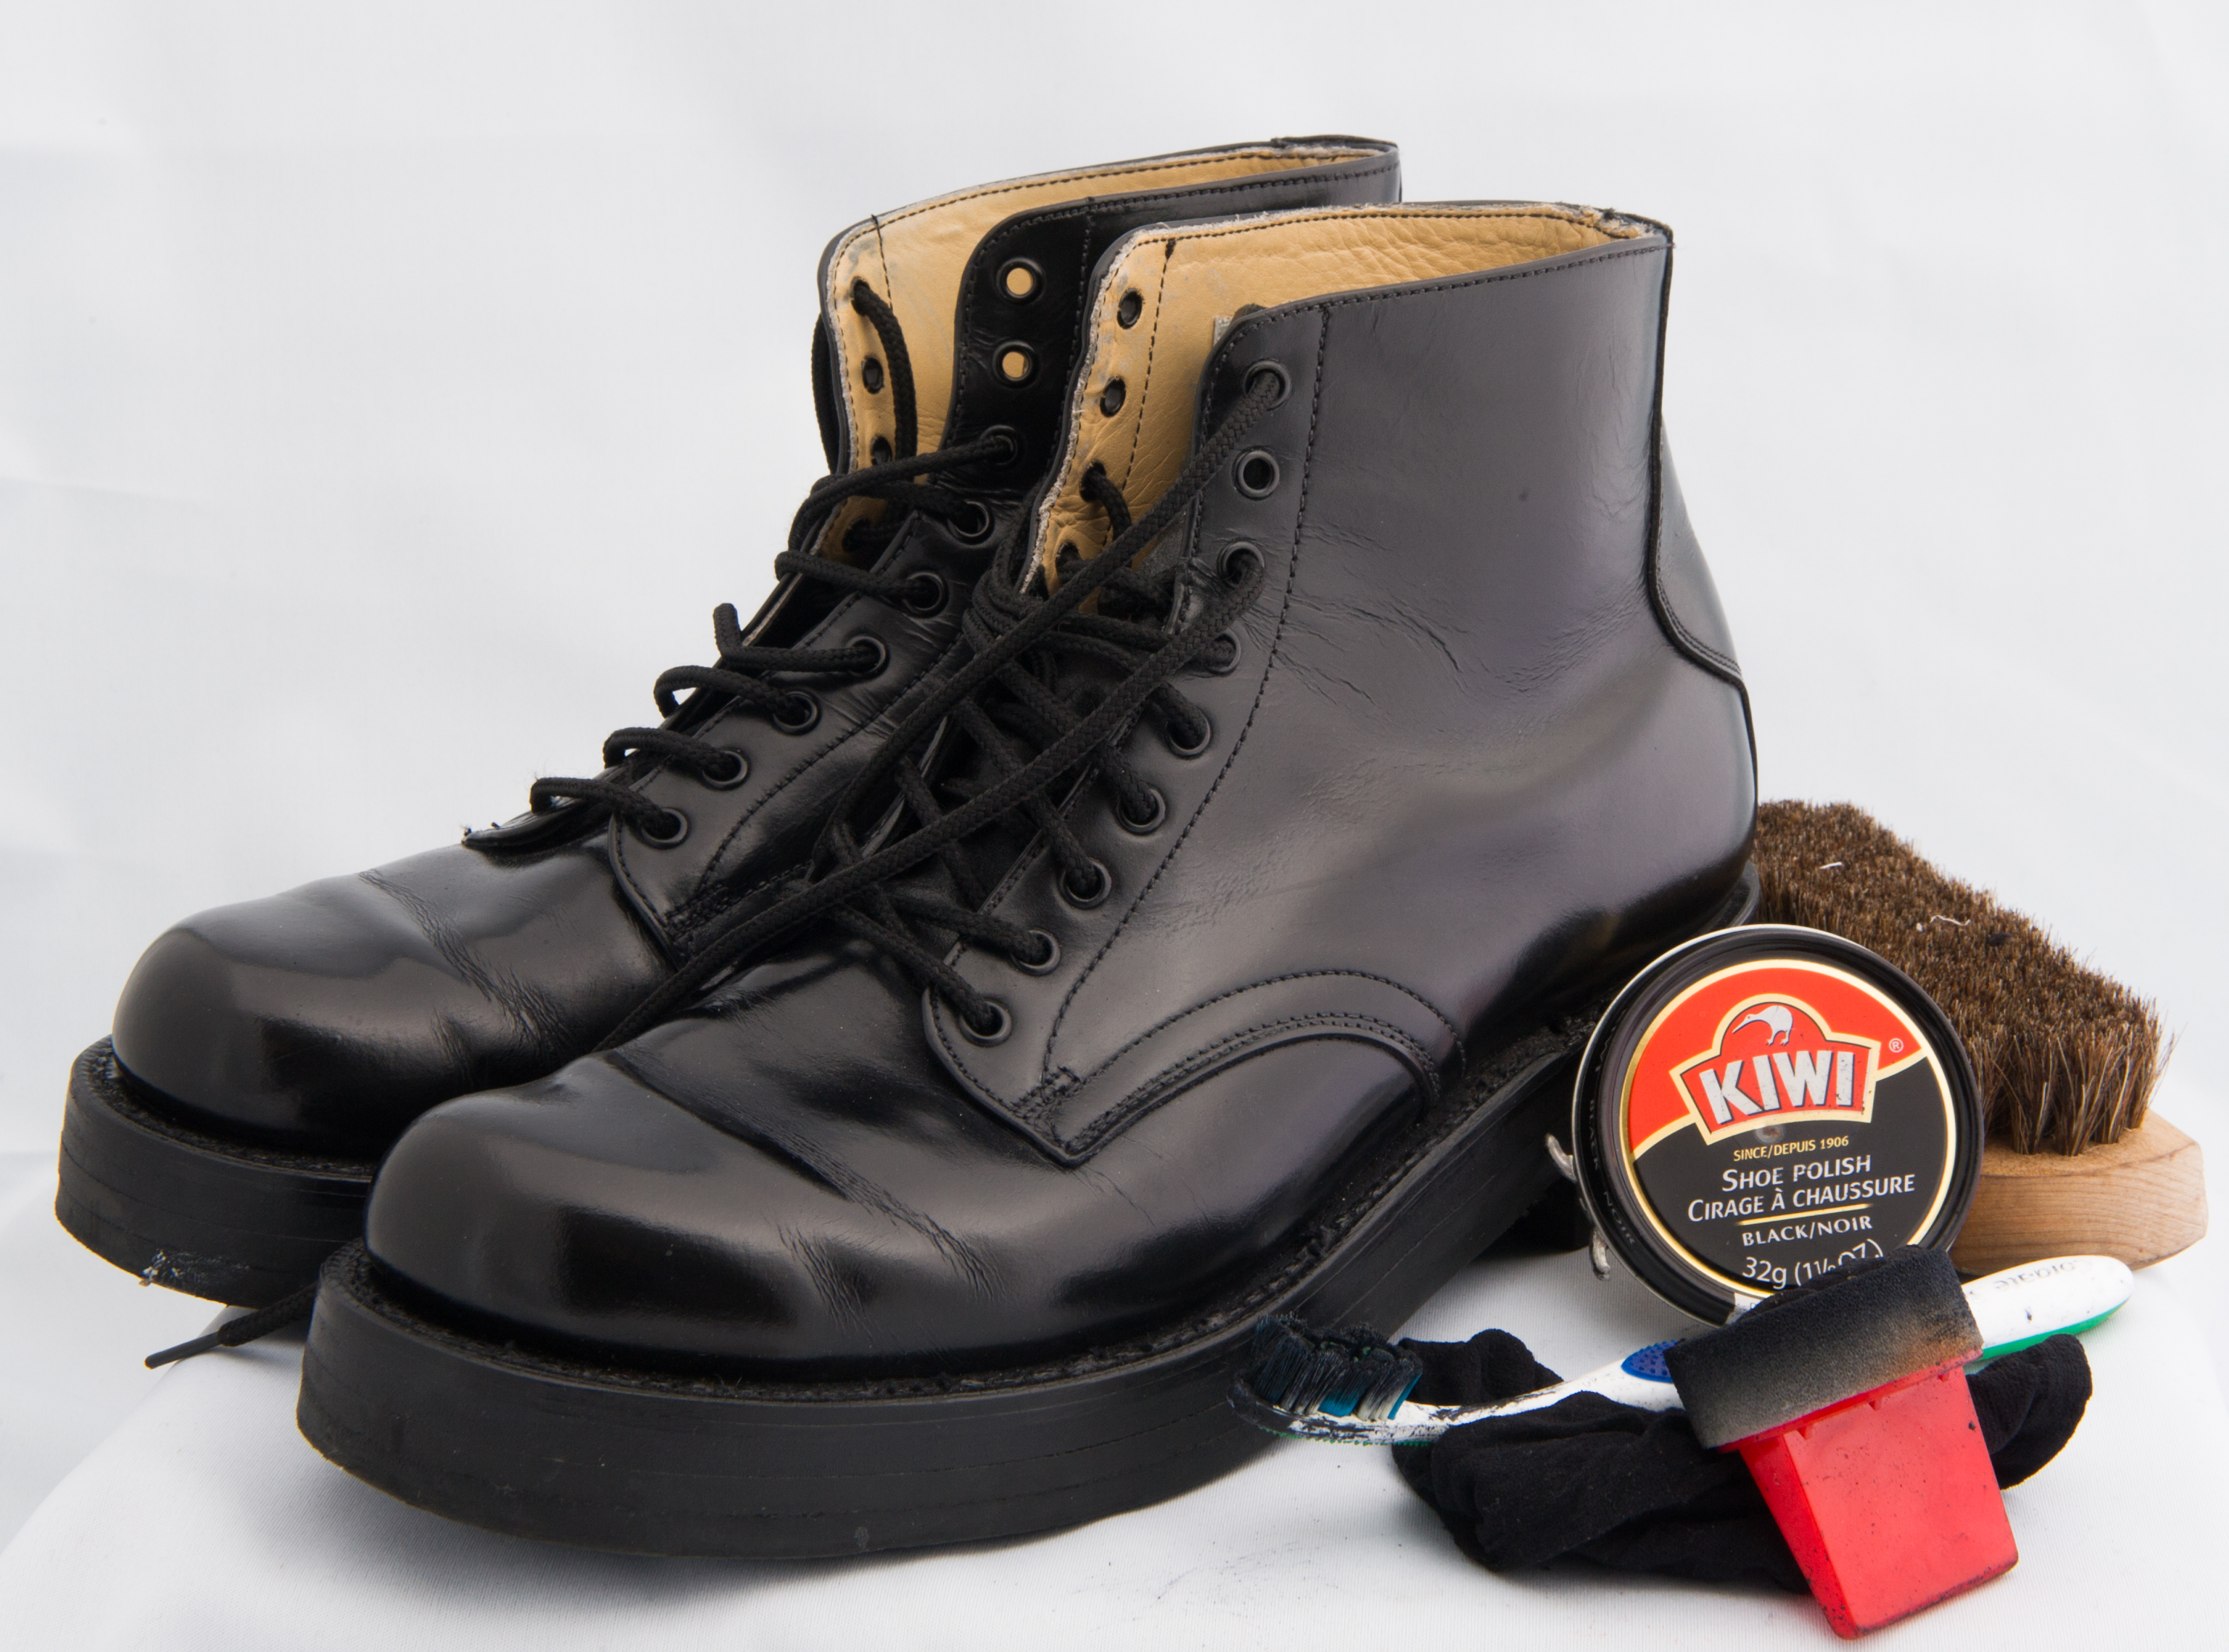 Black Honour Guard lace up boots and polishing kit, with Kiwi polish in round container, and red brush.